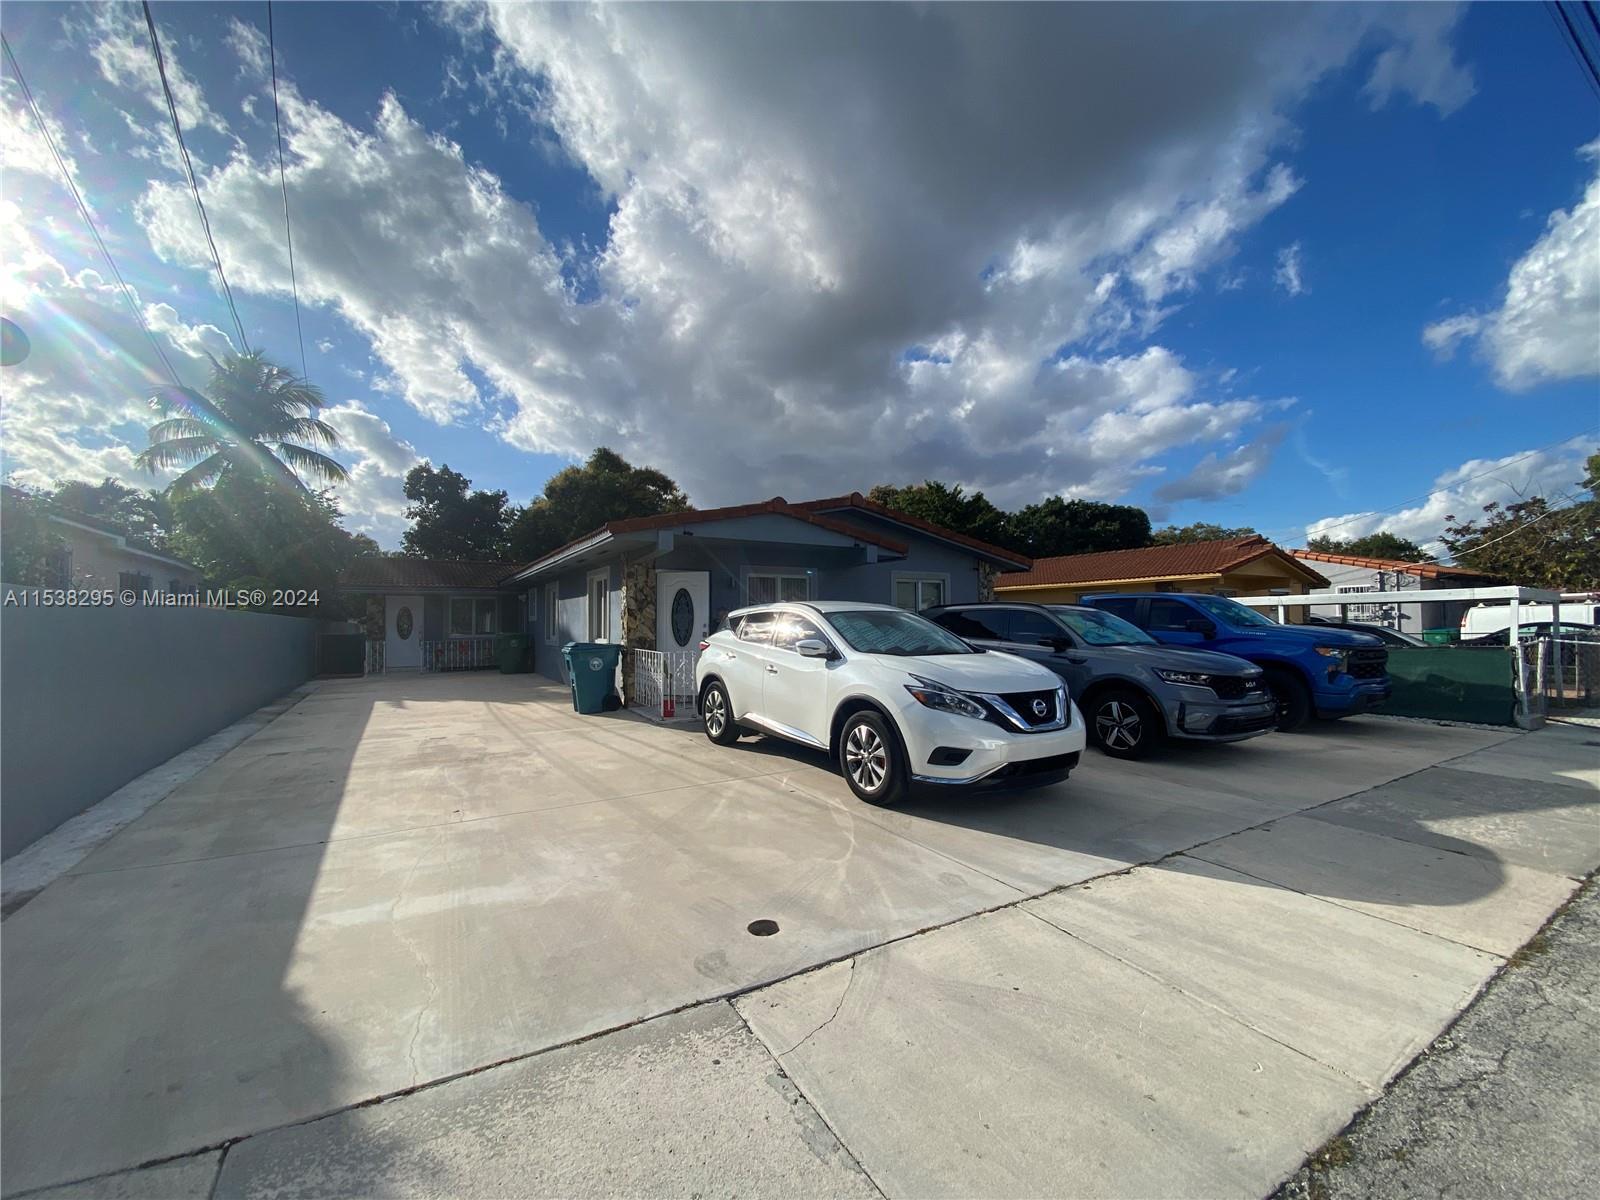 Photo of 740 NW 32nd Ct in Miami, FL